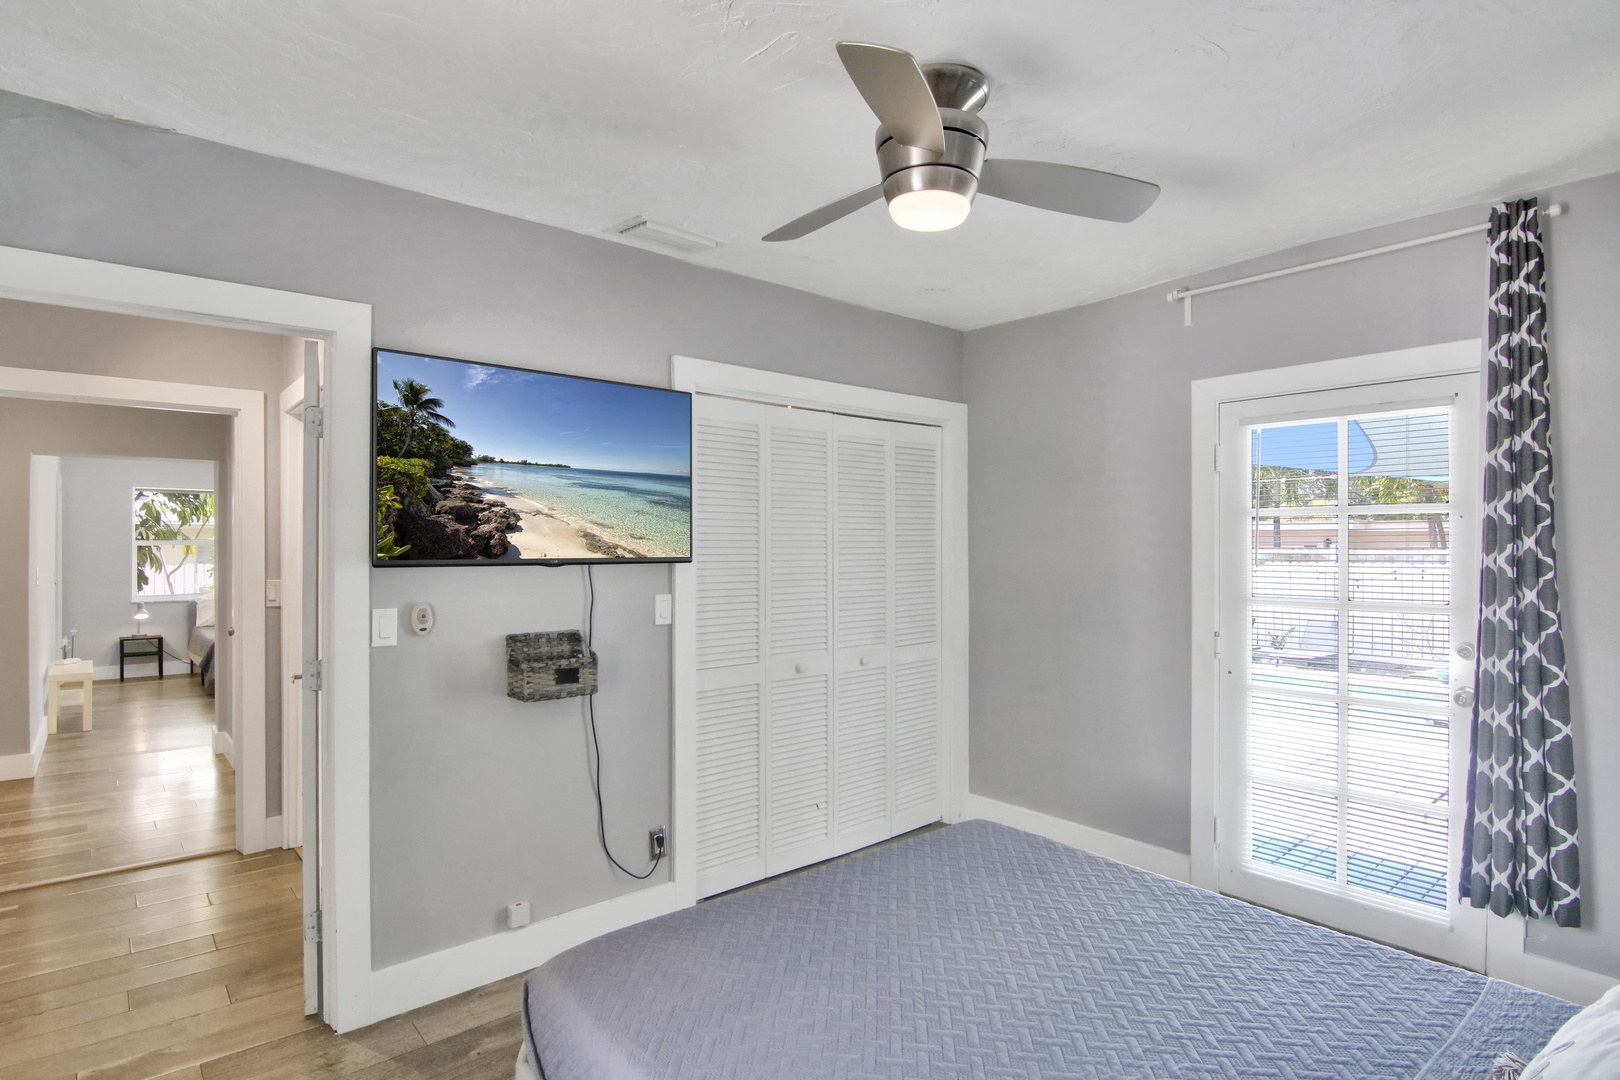 This cozy queen bedroom offers a Smart TV & access to the pool area